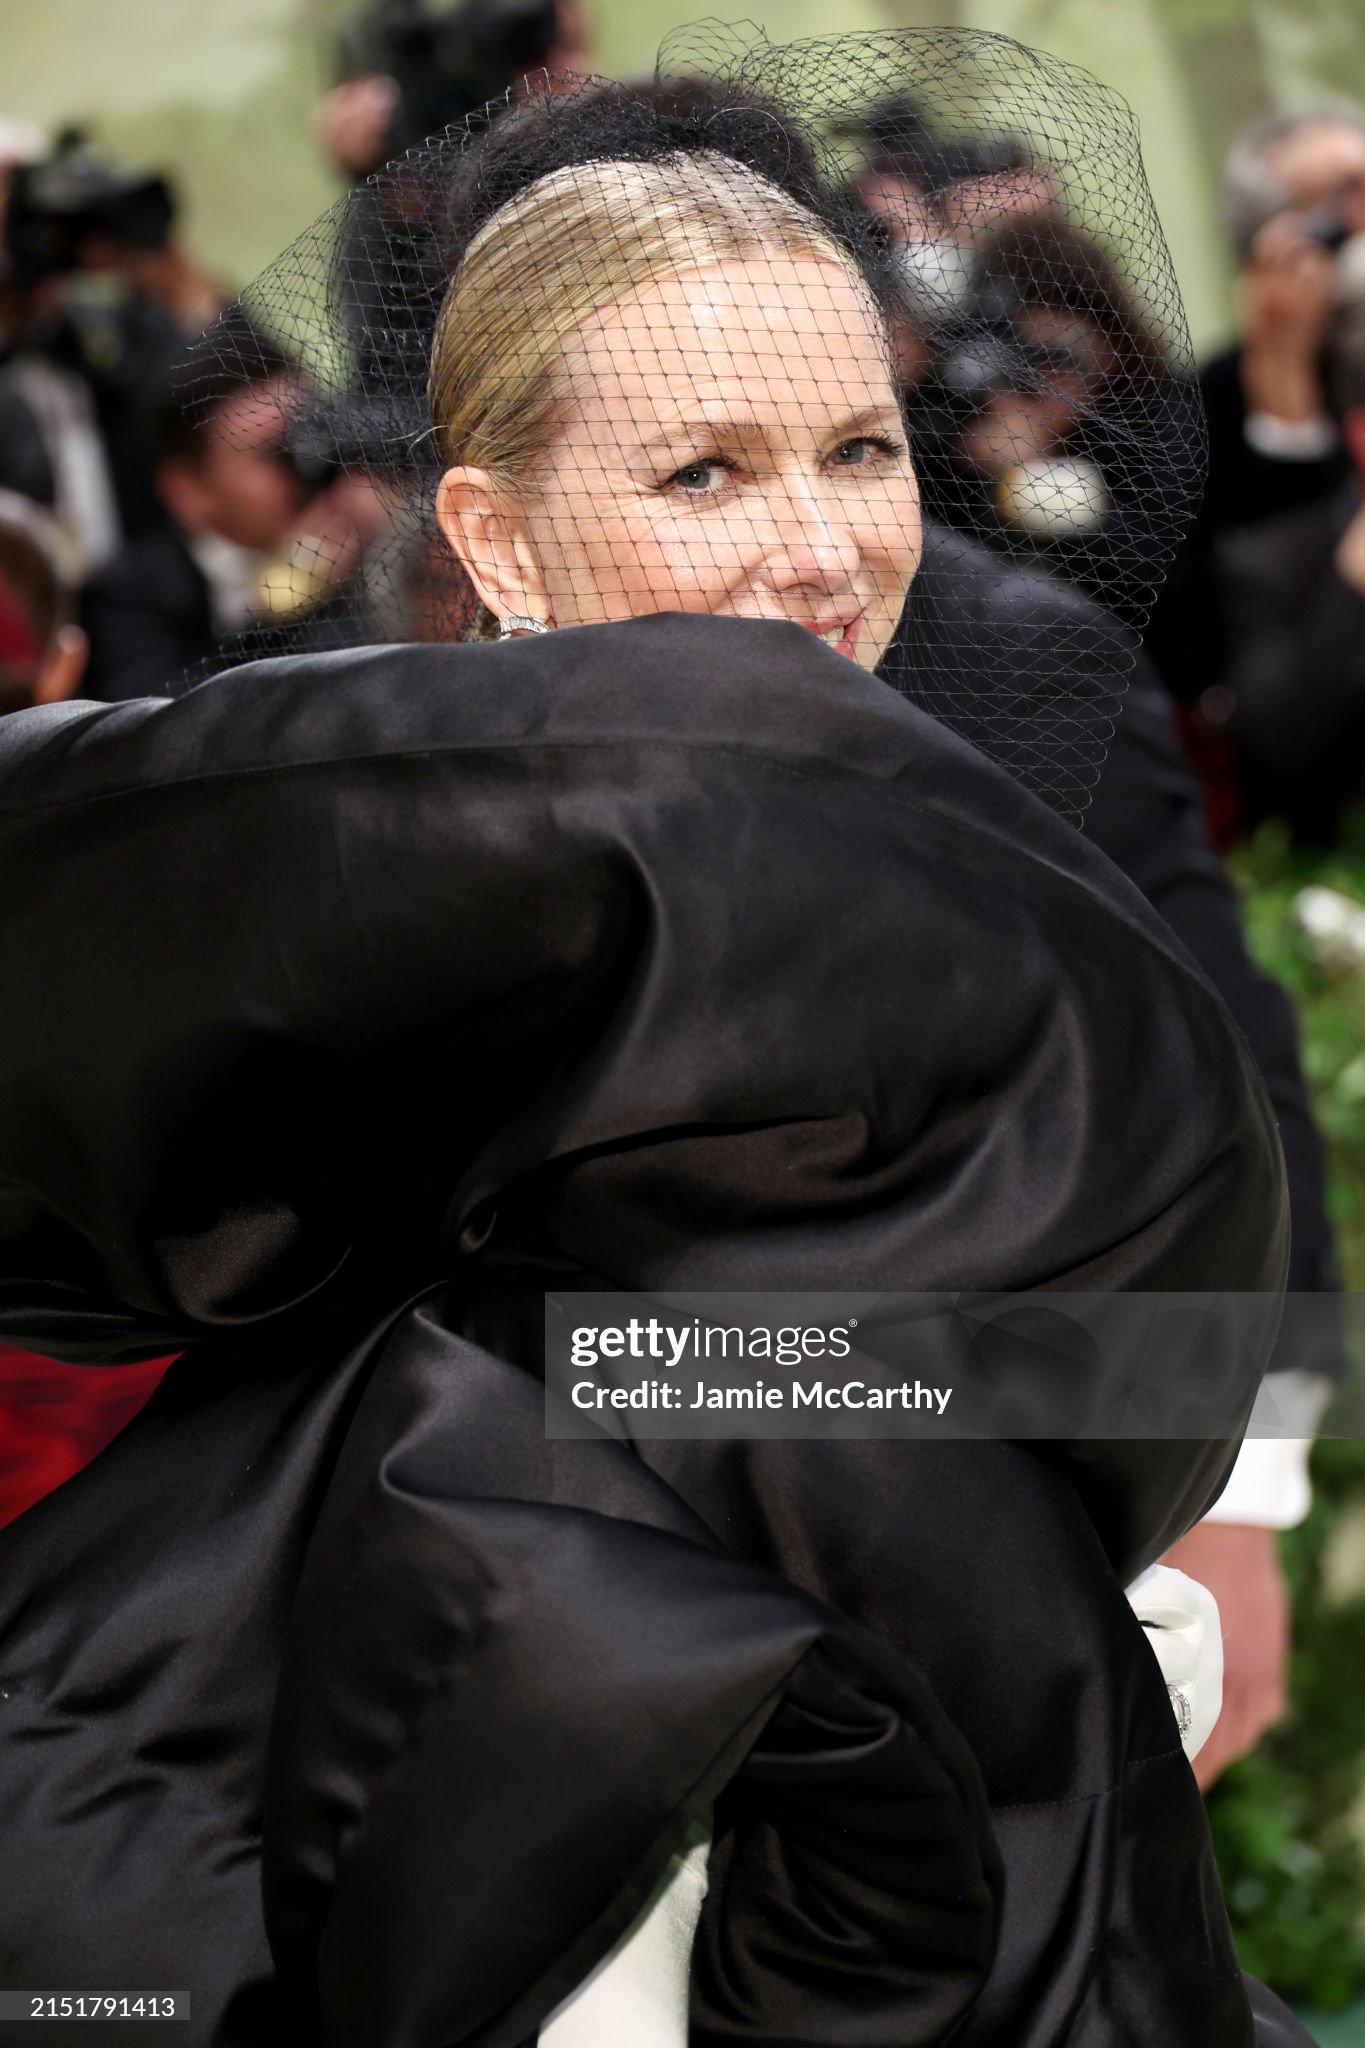 gettyimages-2151791413-2048x2048.jpg